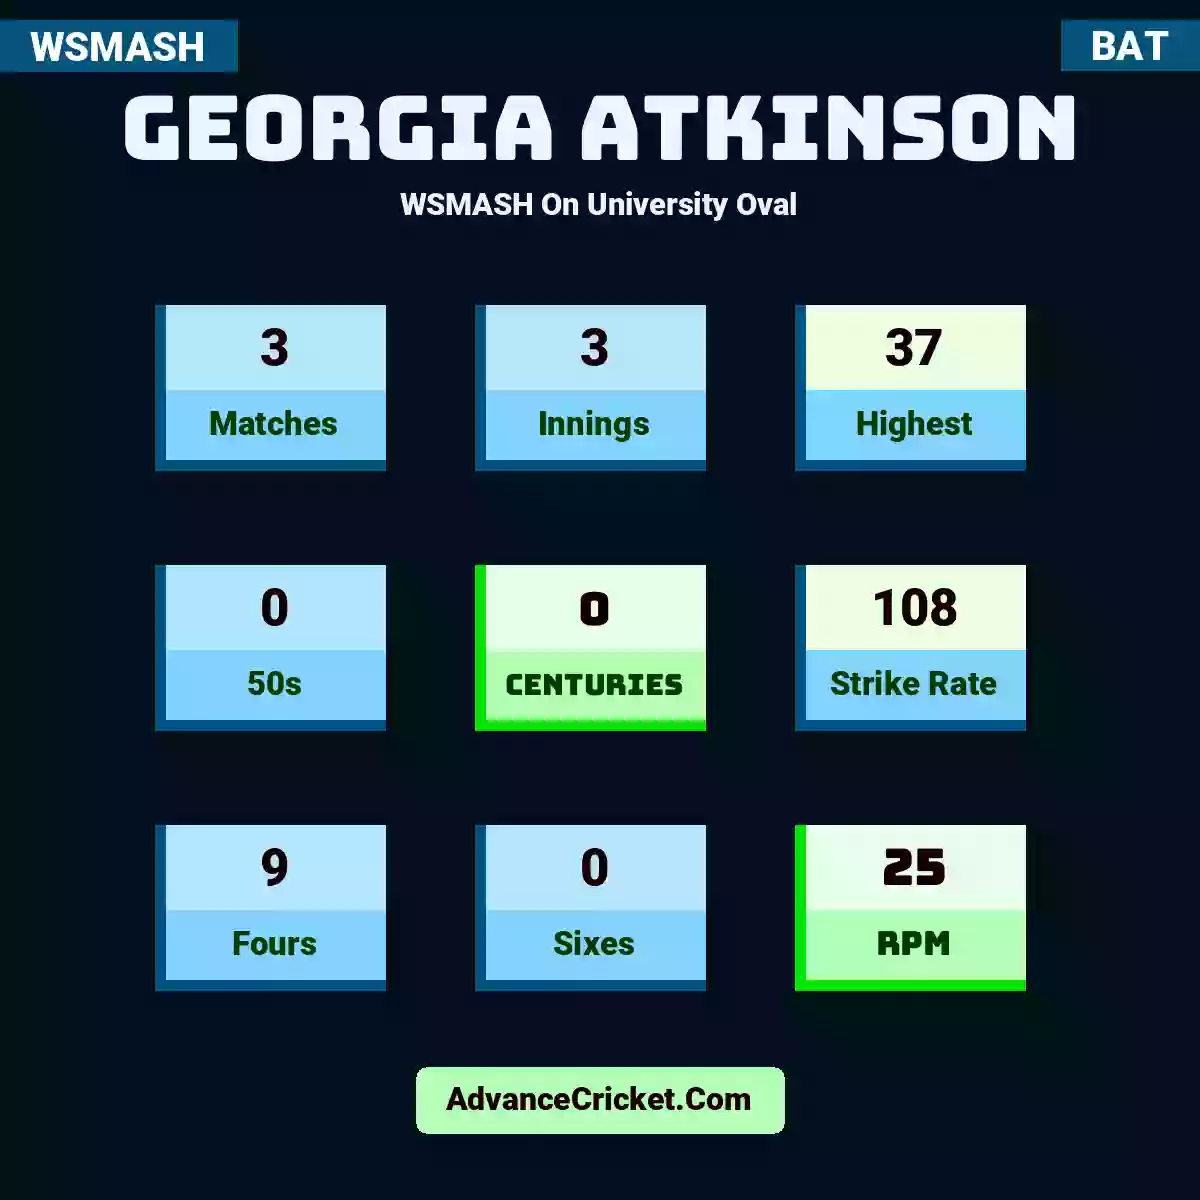 Georgia Atkinson WSMASH  On University Oval, Georgia Atkinson played 3 matches, scored 37 runs as highest, 0 half-centuries, and 0 centuries, with a strike rate of 108. G.Atkinson hit 9 fours and 0 sixes, with an RPM of 25.